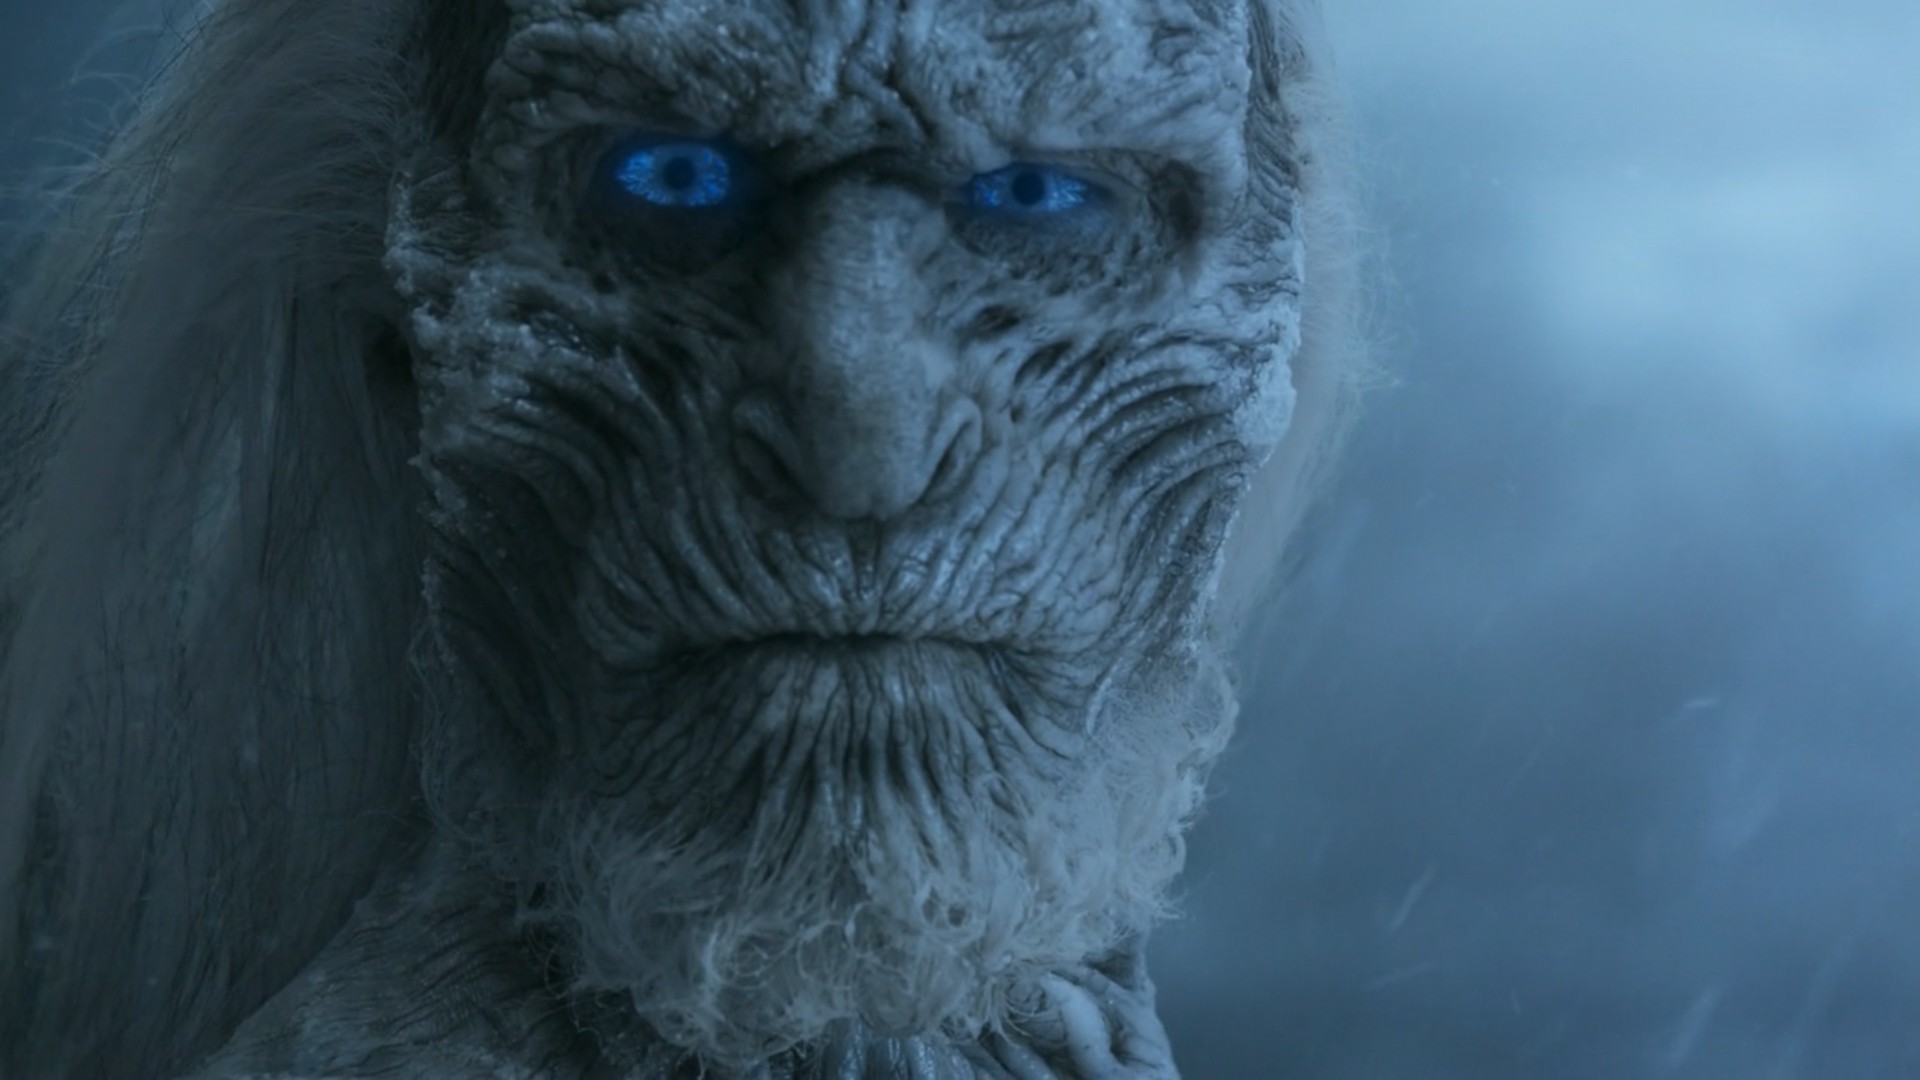 Game Of Thrones, White Walkers Wallpaper